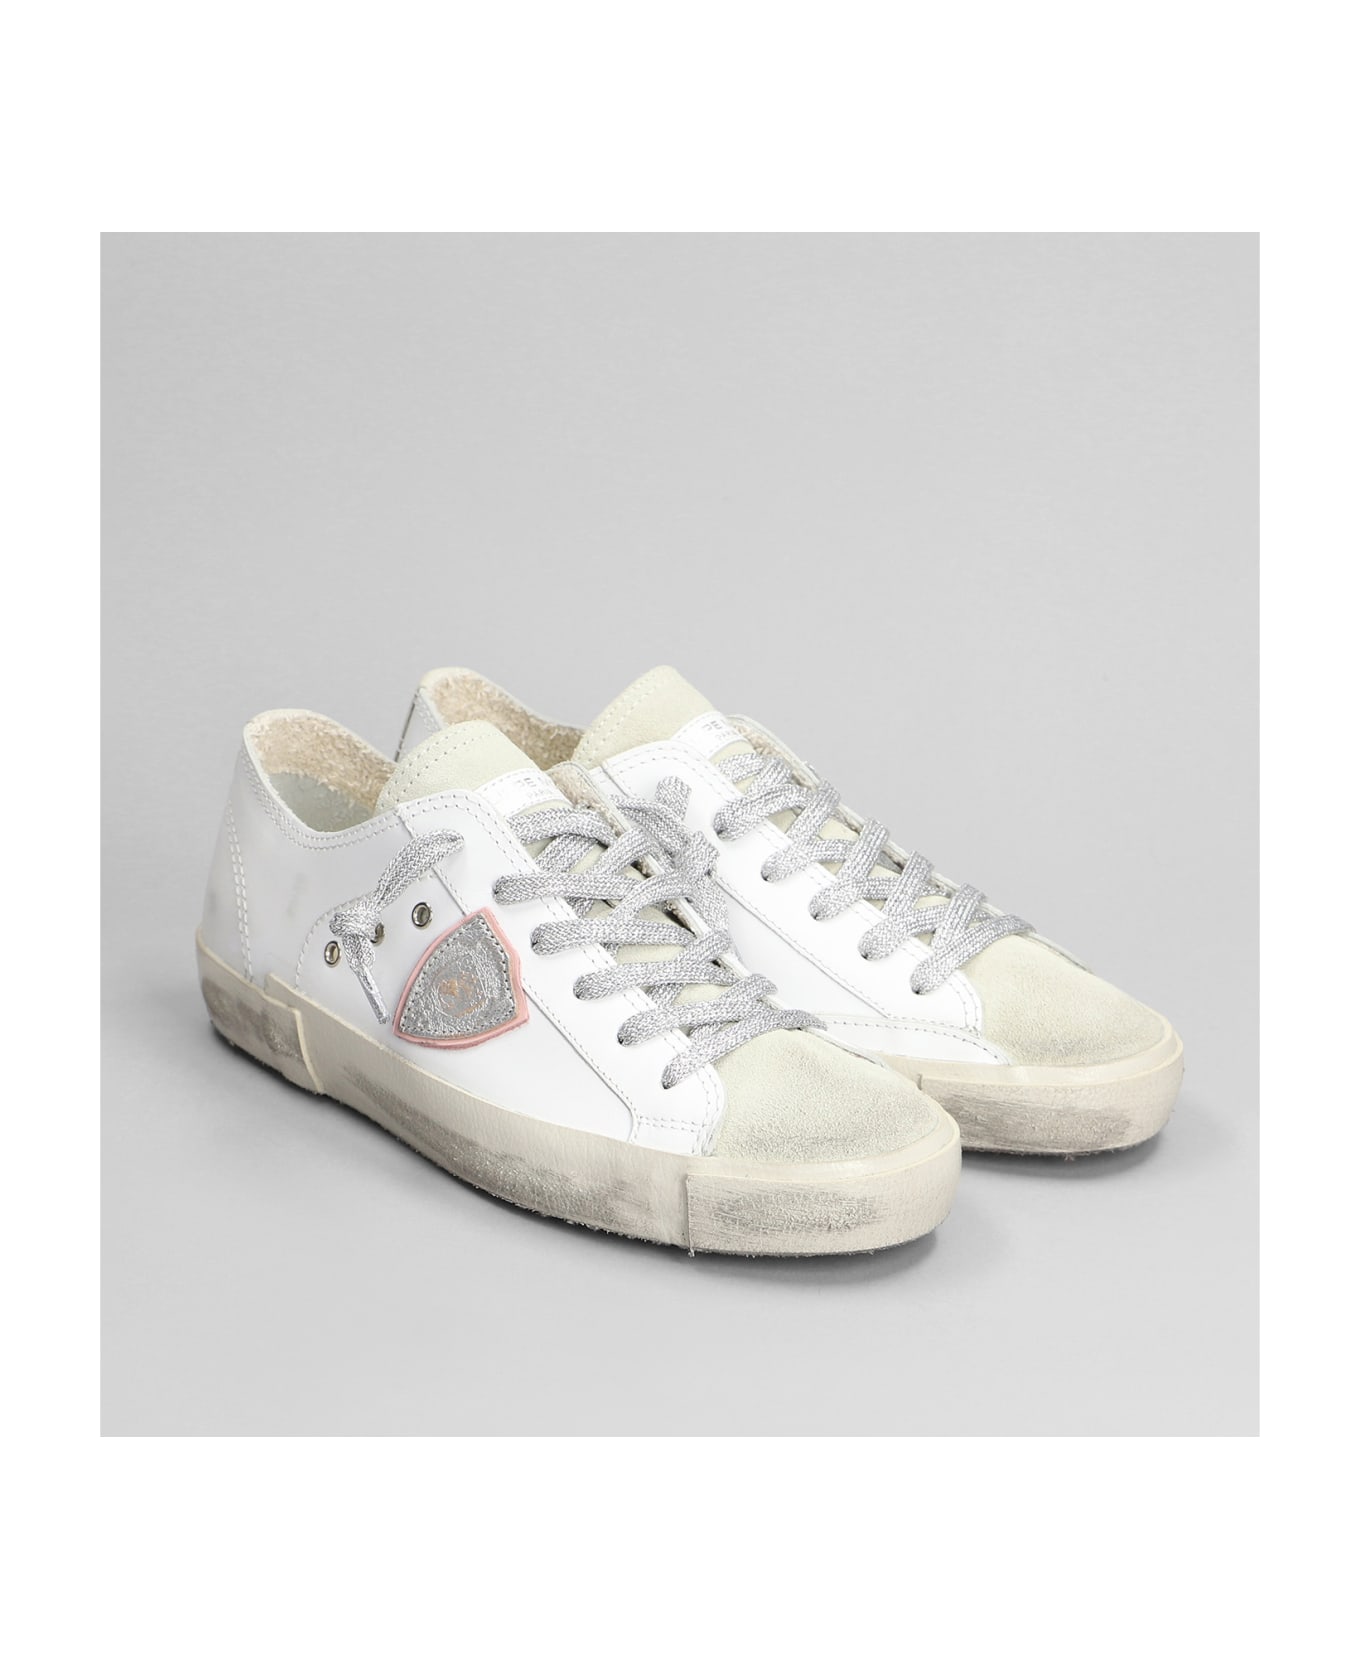 Philippe Model Prsx Low Sneakers In White Suede And Leather - white